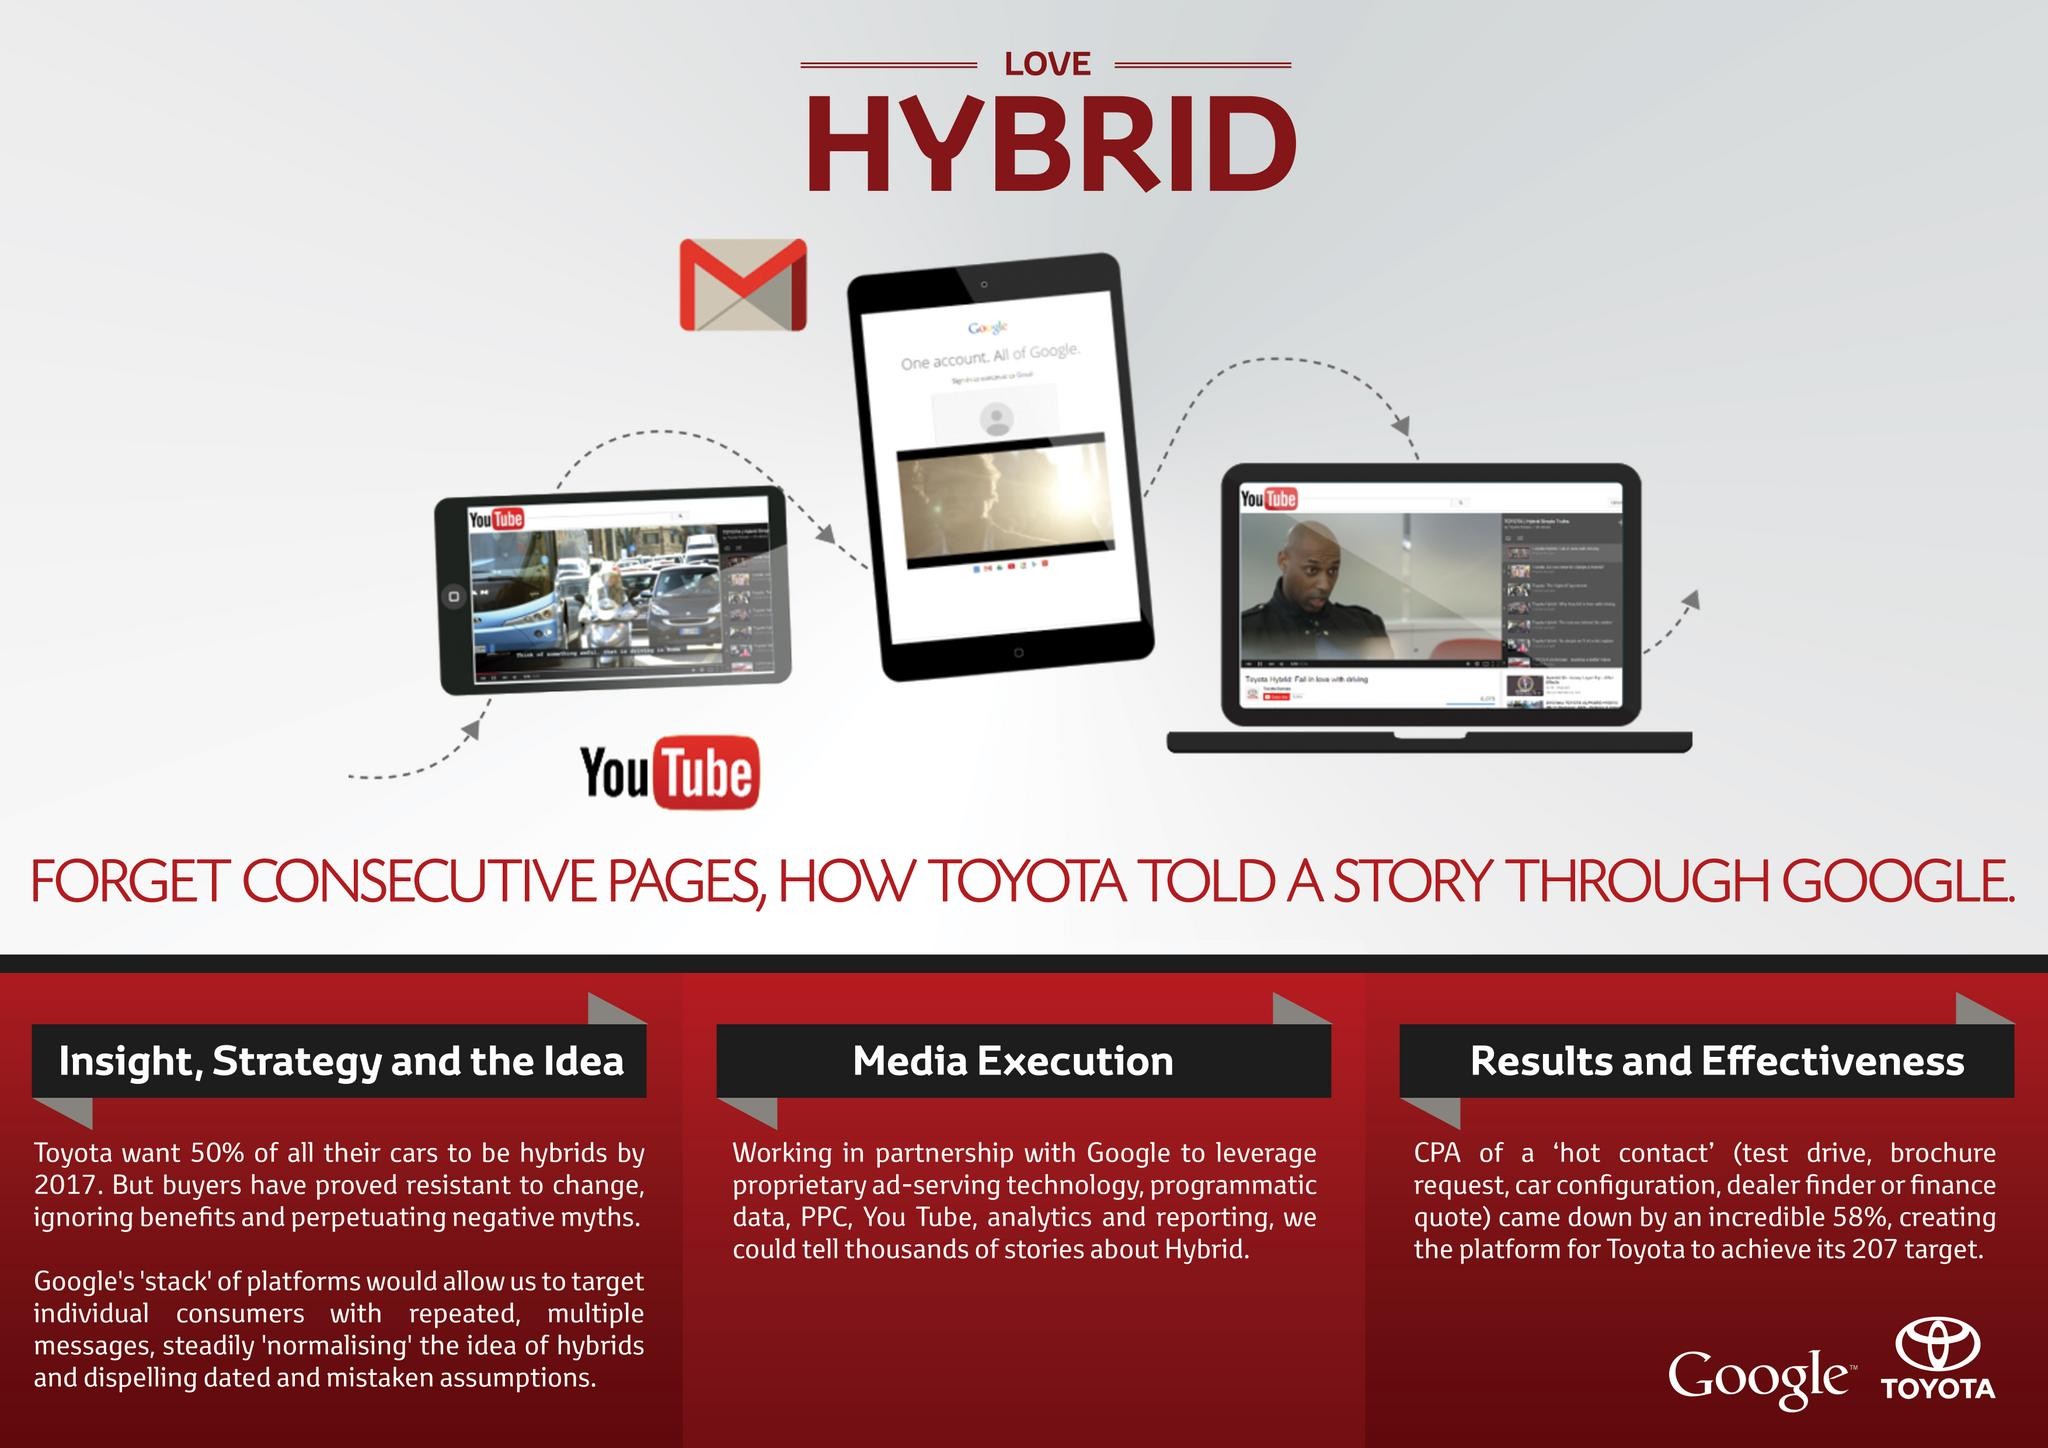 FORGET CONSECUTIVE PAGES, HOW TOYOTA TOLD A STORY THROUGH GOOGLE.